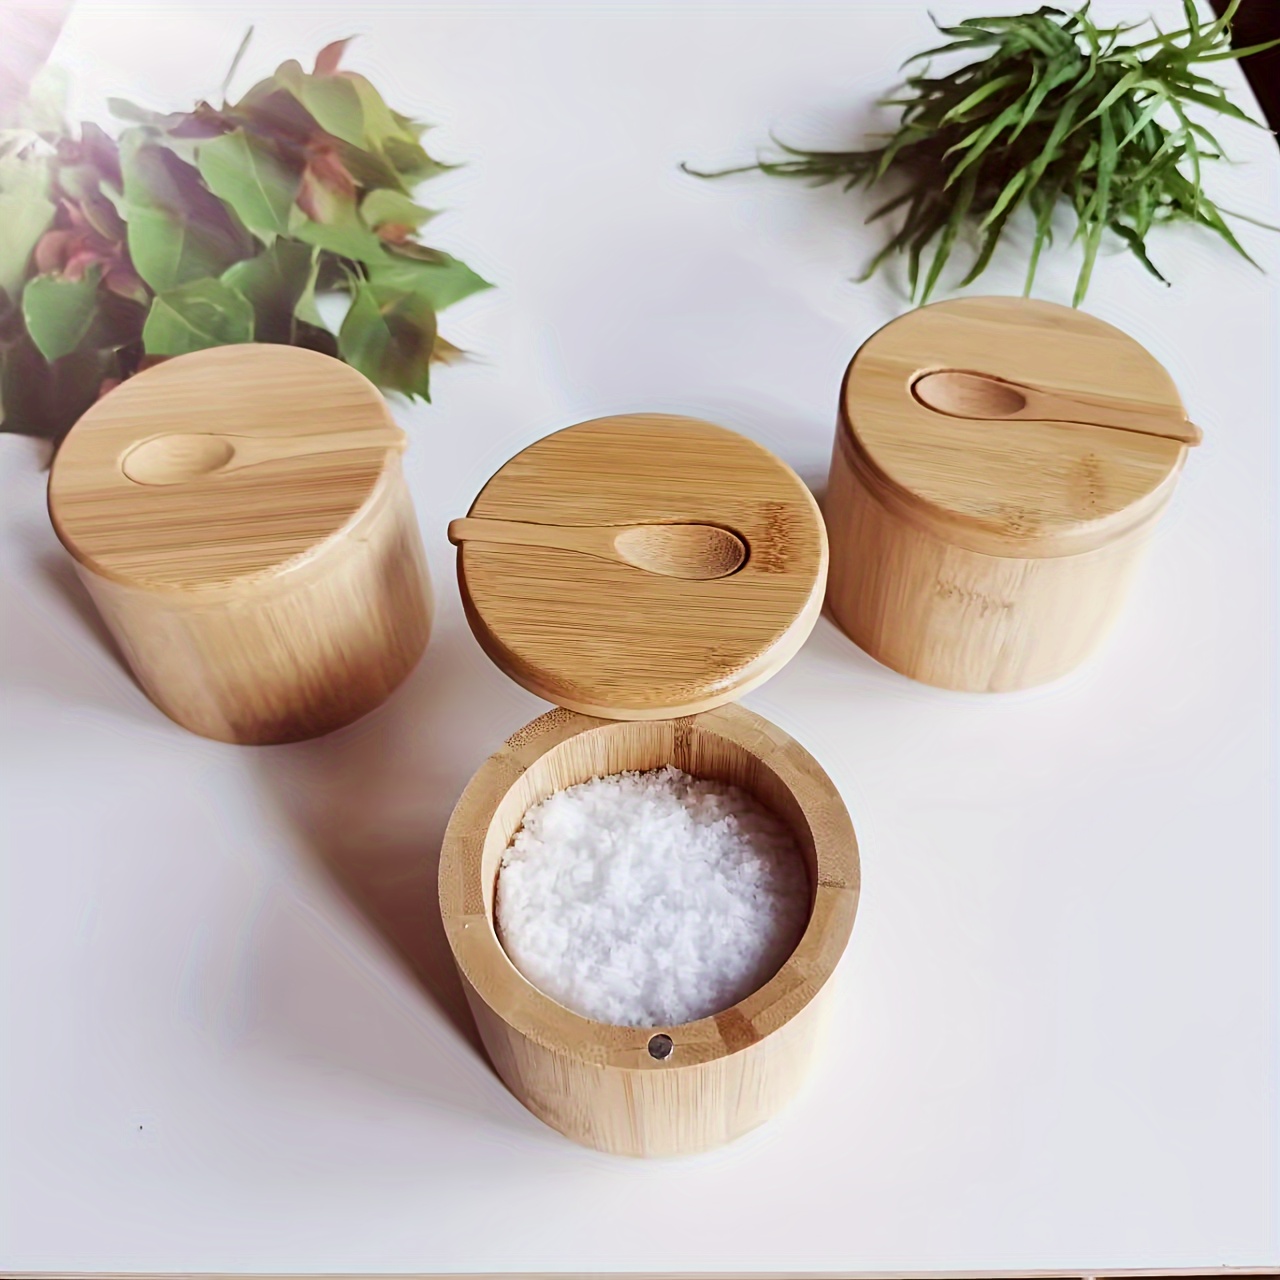 

Bamboo Salt Box With Spoon - Handmade Wooden Spice Jar With Magnetic Swivel Lid, Kitchen Seasoning Canister For Home Use